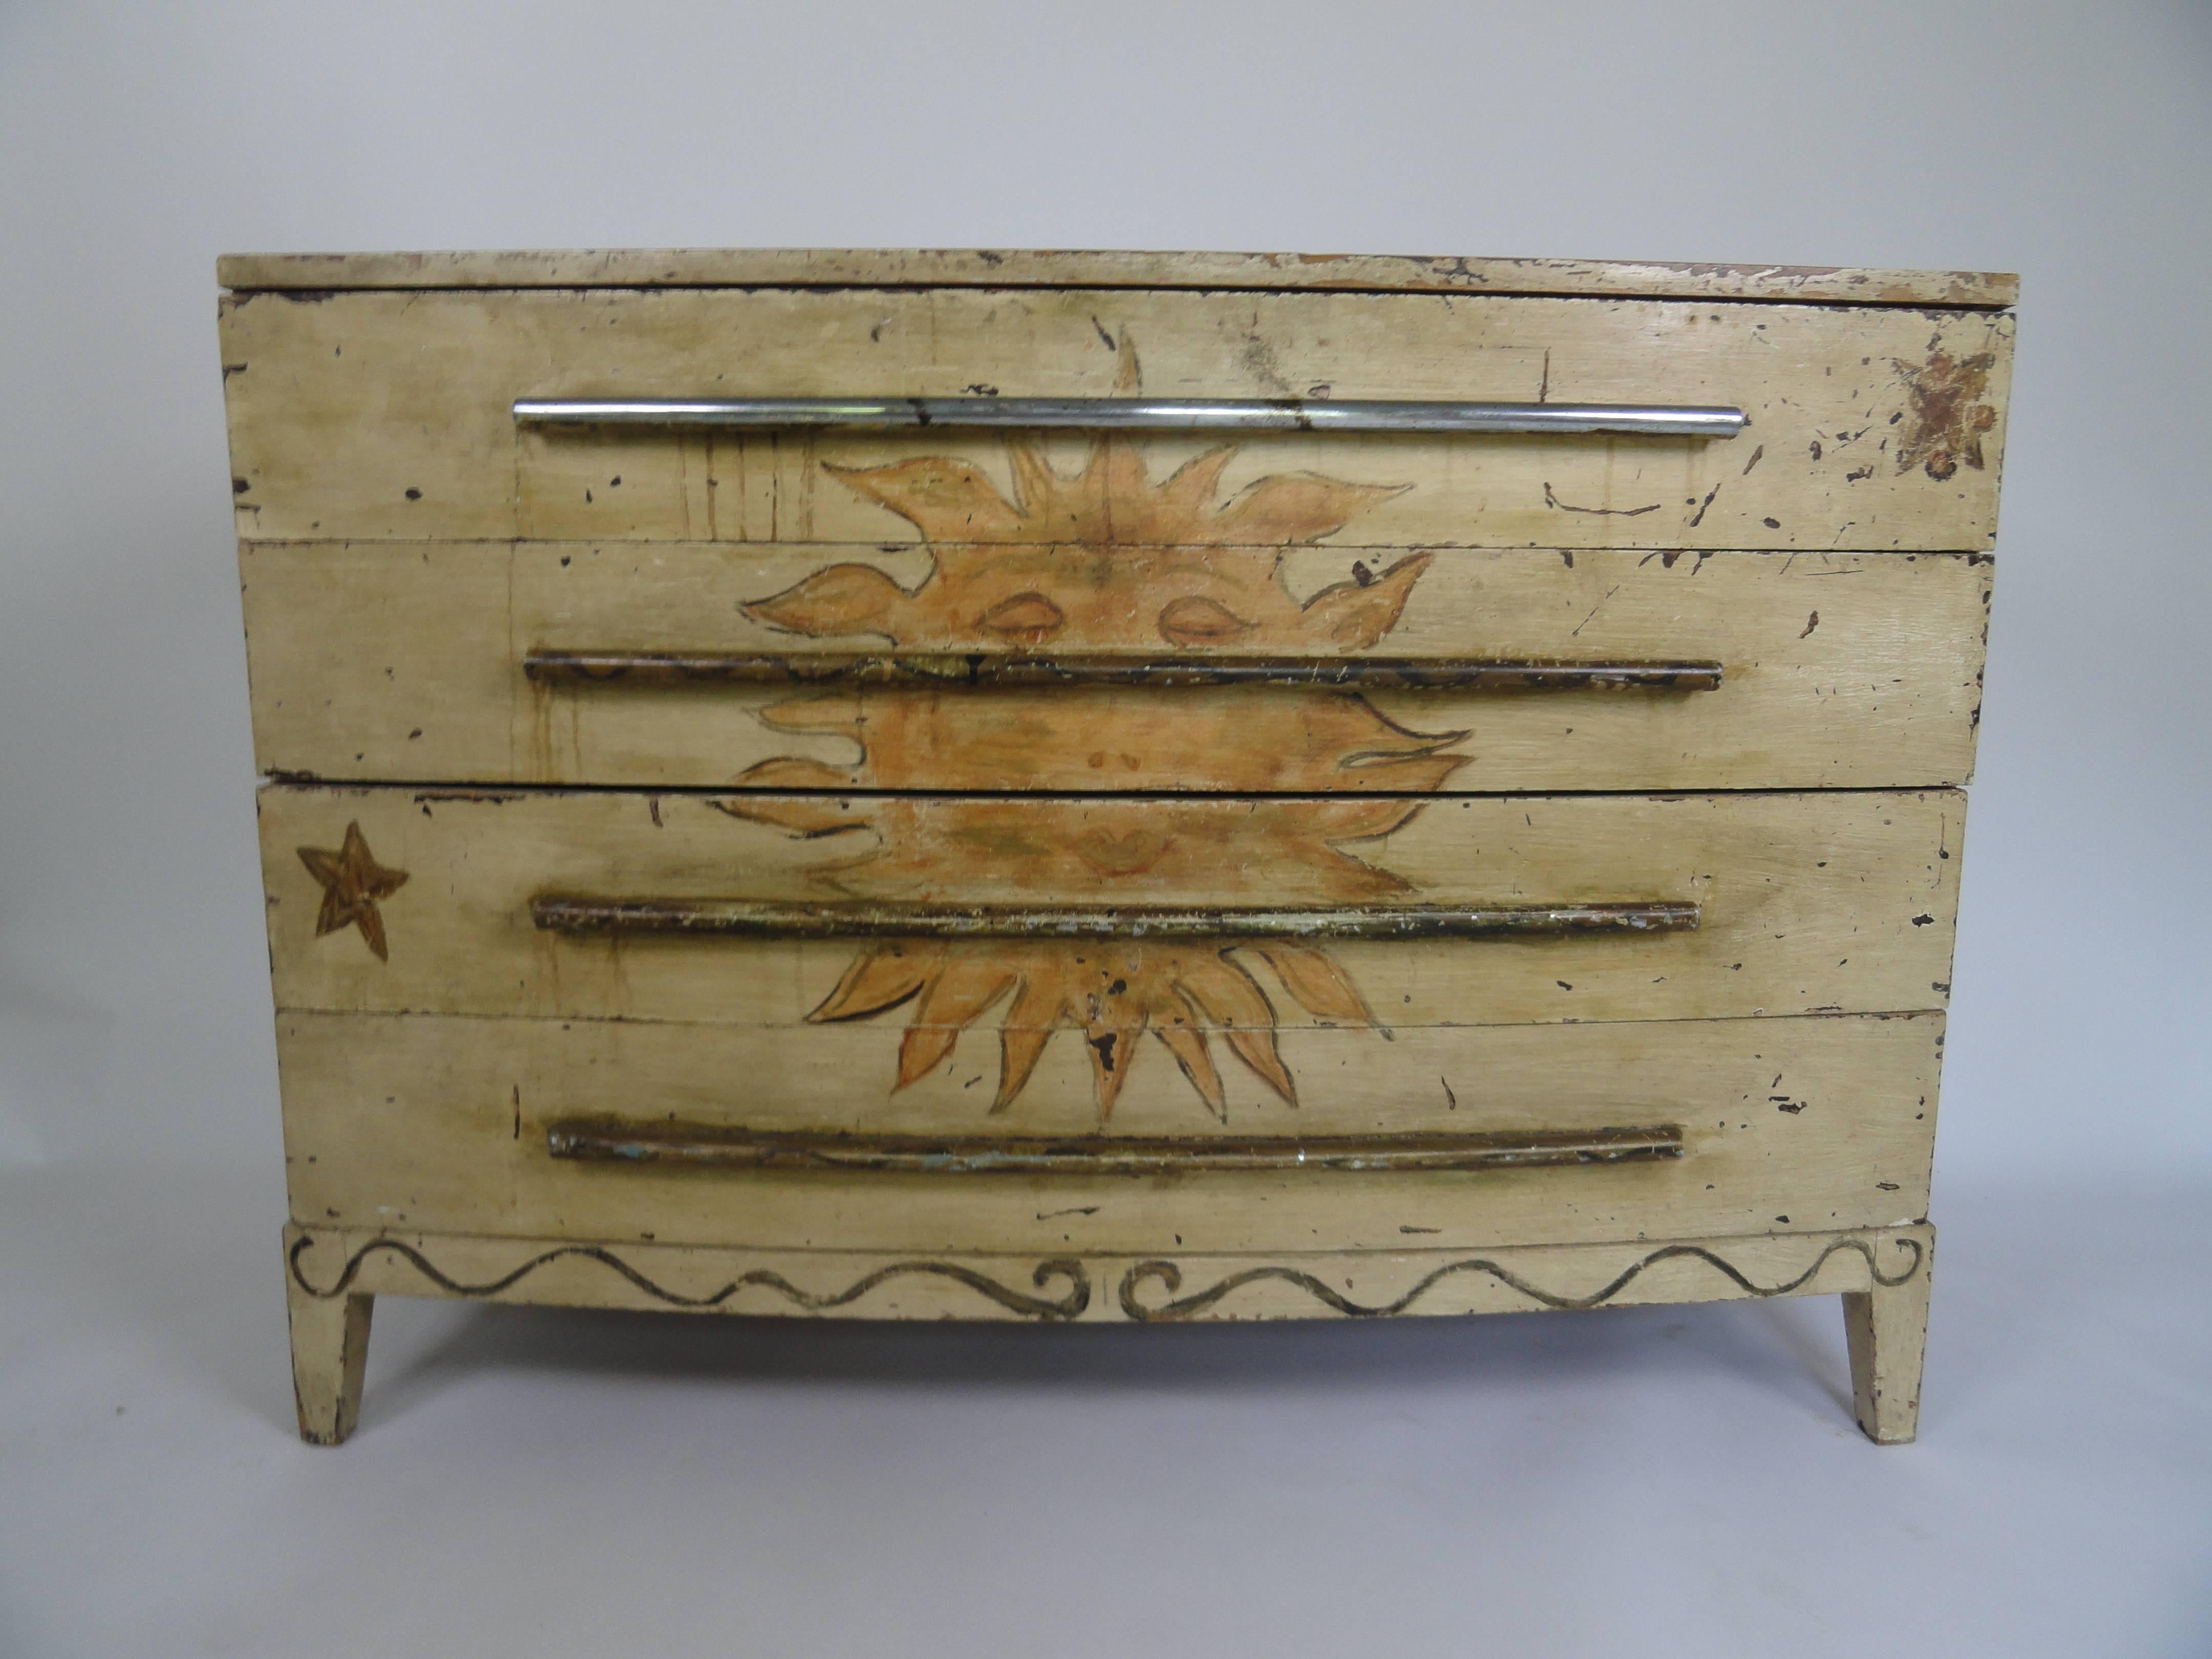 Very fine example of American Folk Art from the 1940s. Four-drawer chest with hand-painted sunburst and stars on front and both sides. Original hardware. Naturally worn finish which only adds to the personality of the piece.
Chest has been praised